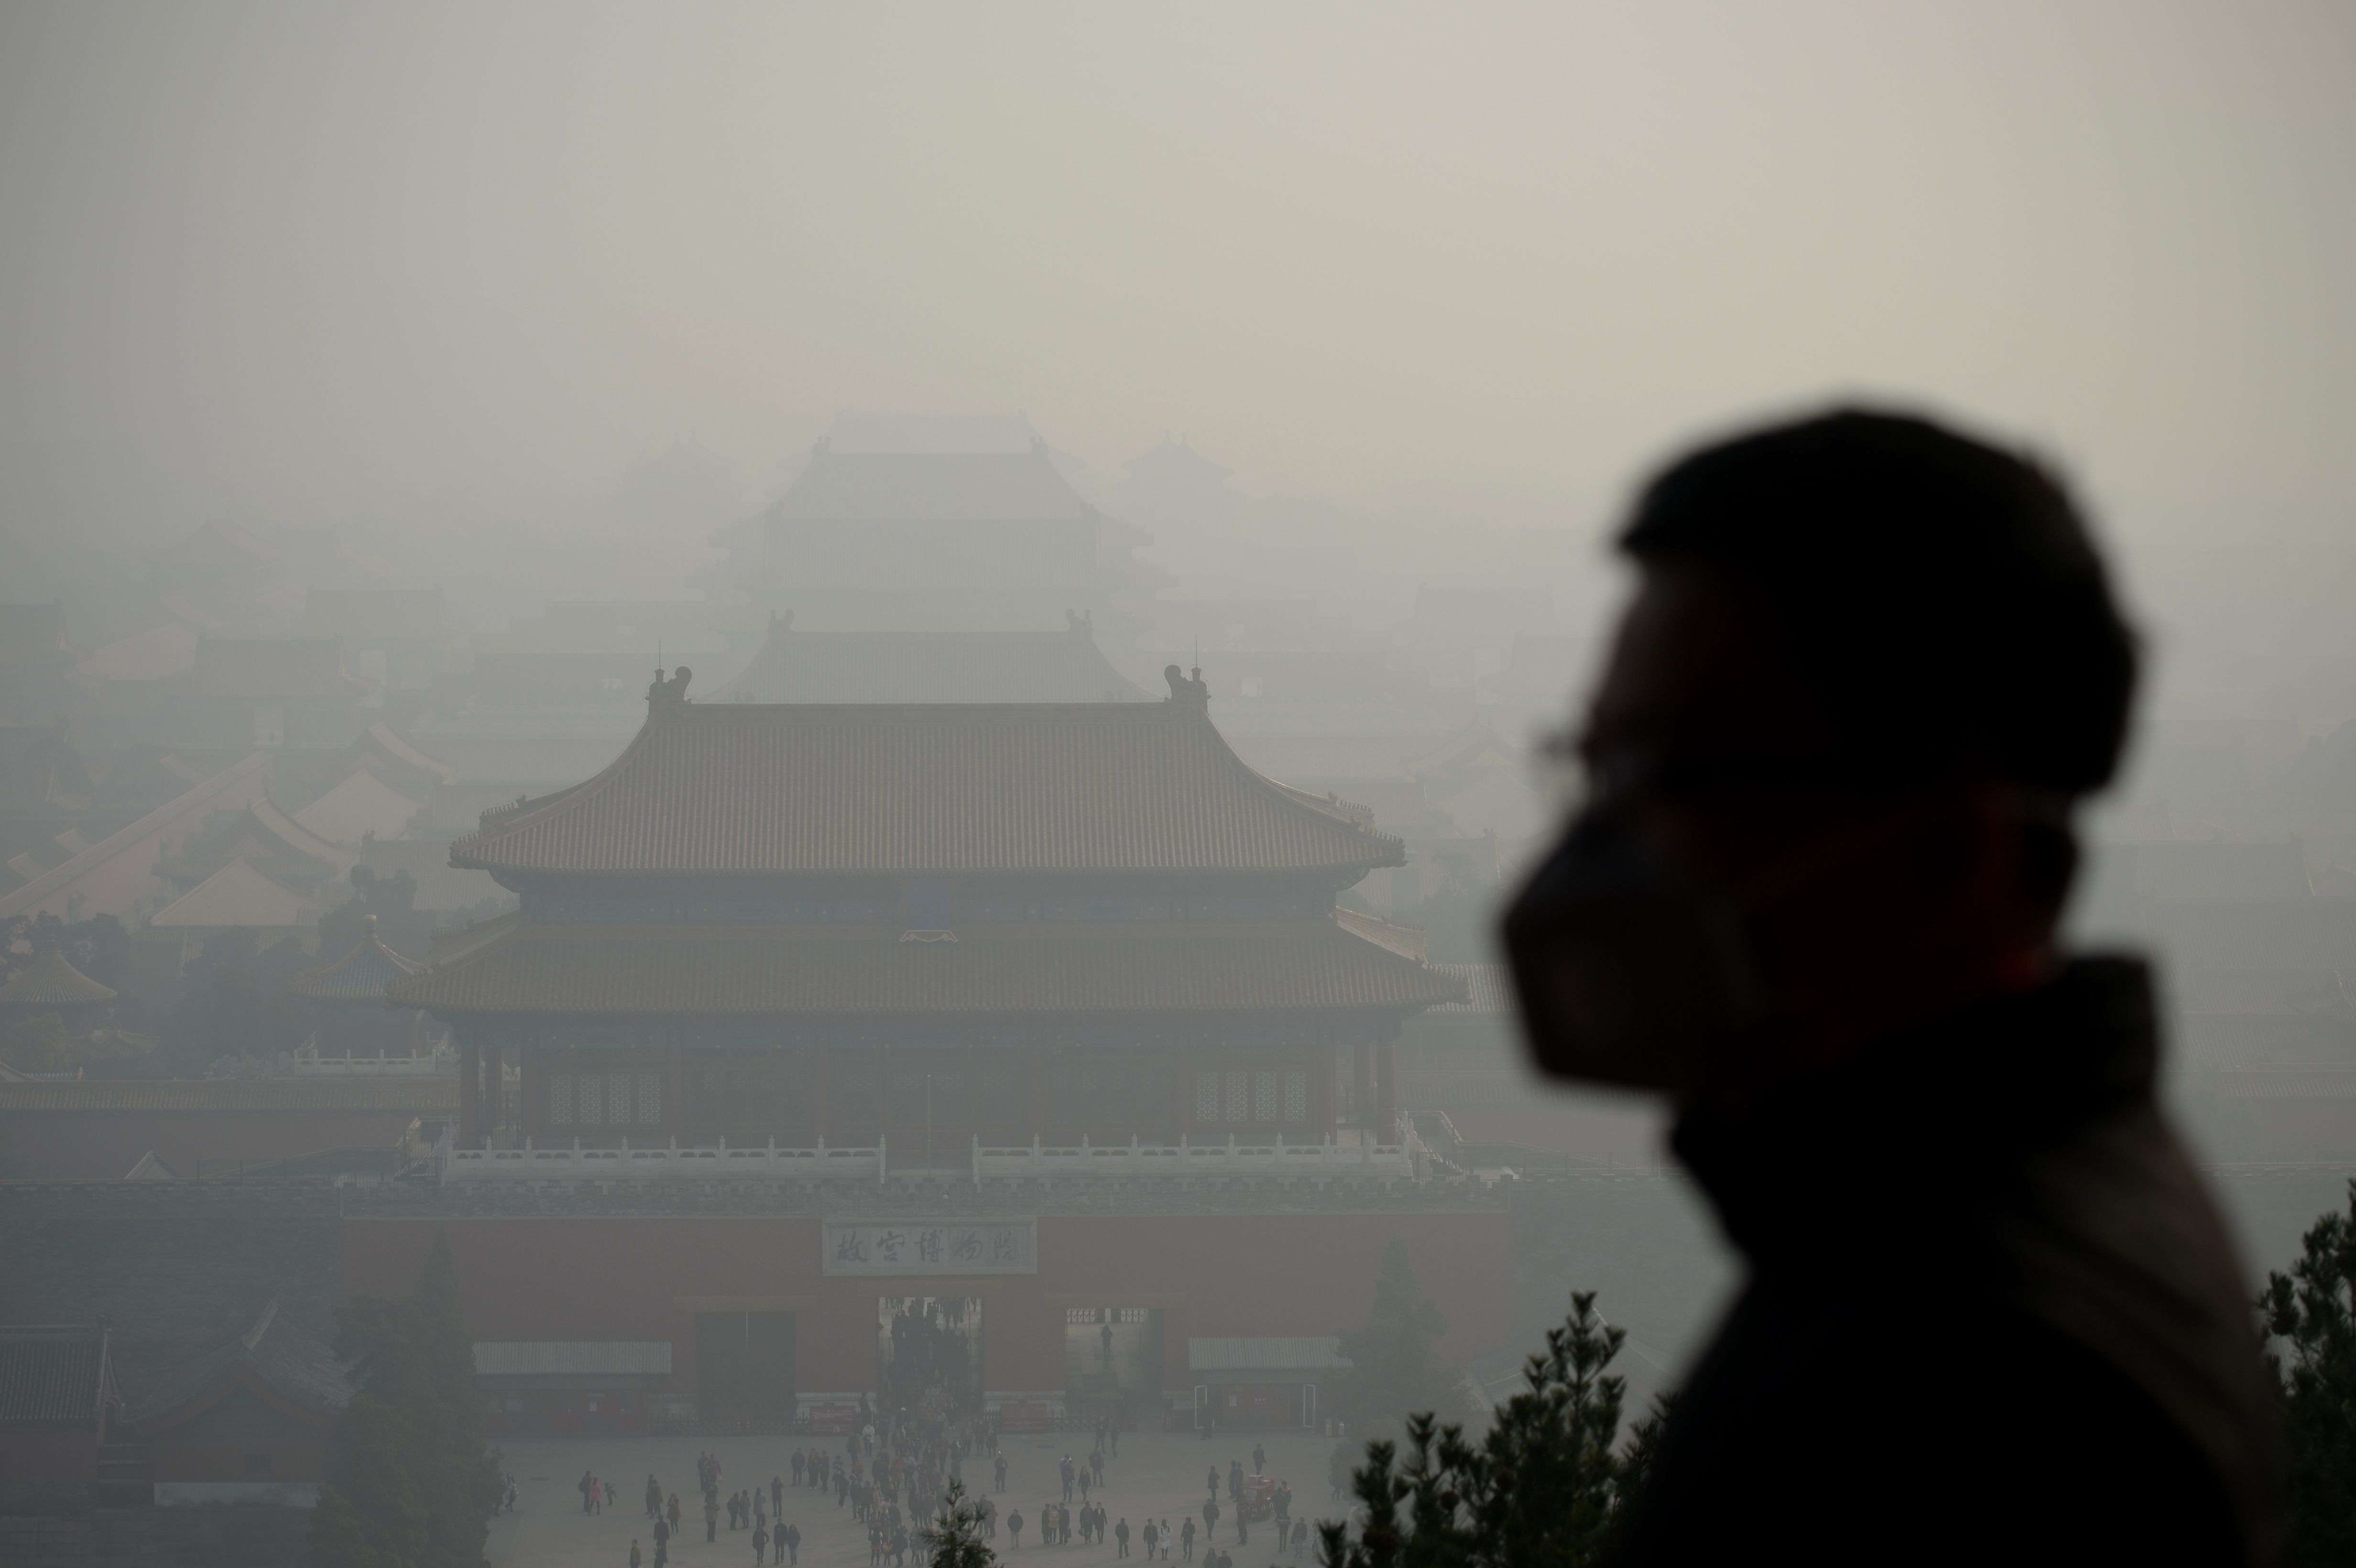 Beijing’s air quality index reading hit 220 at noon on Wednesday – far above the heathy level of 25 for daily exposure stipulated by the World Health Organisation. Photo: AFP